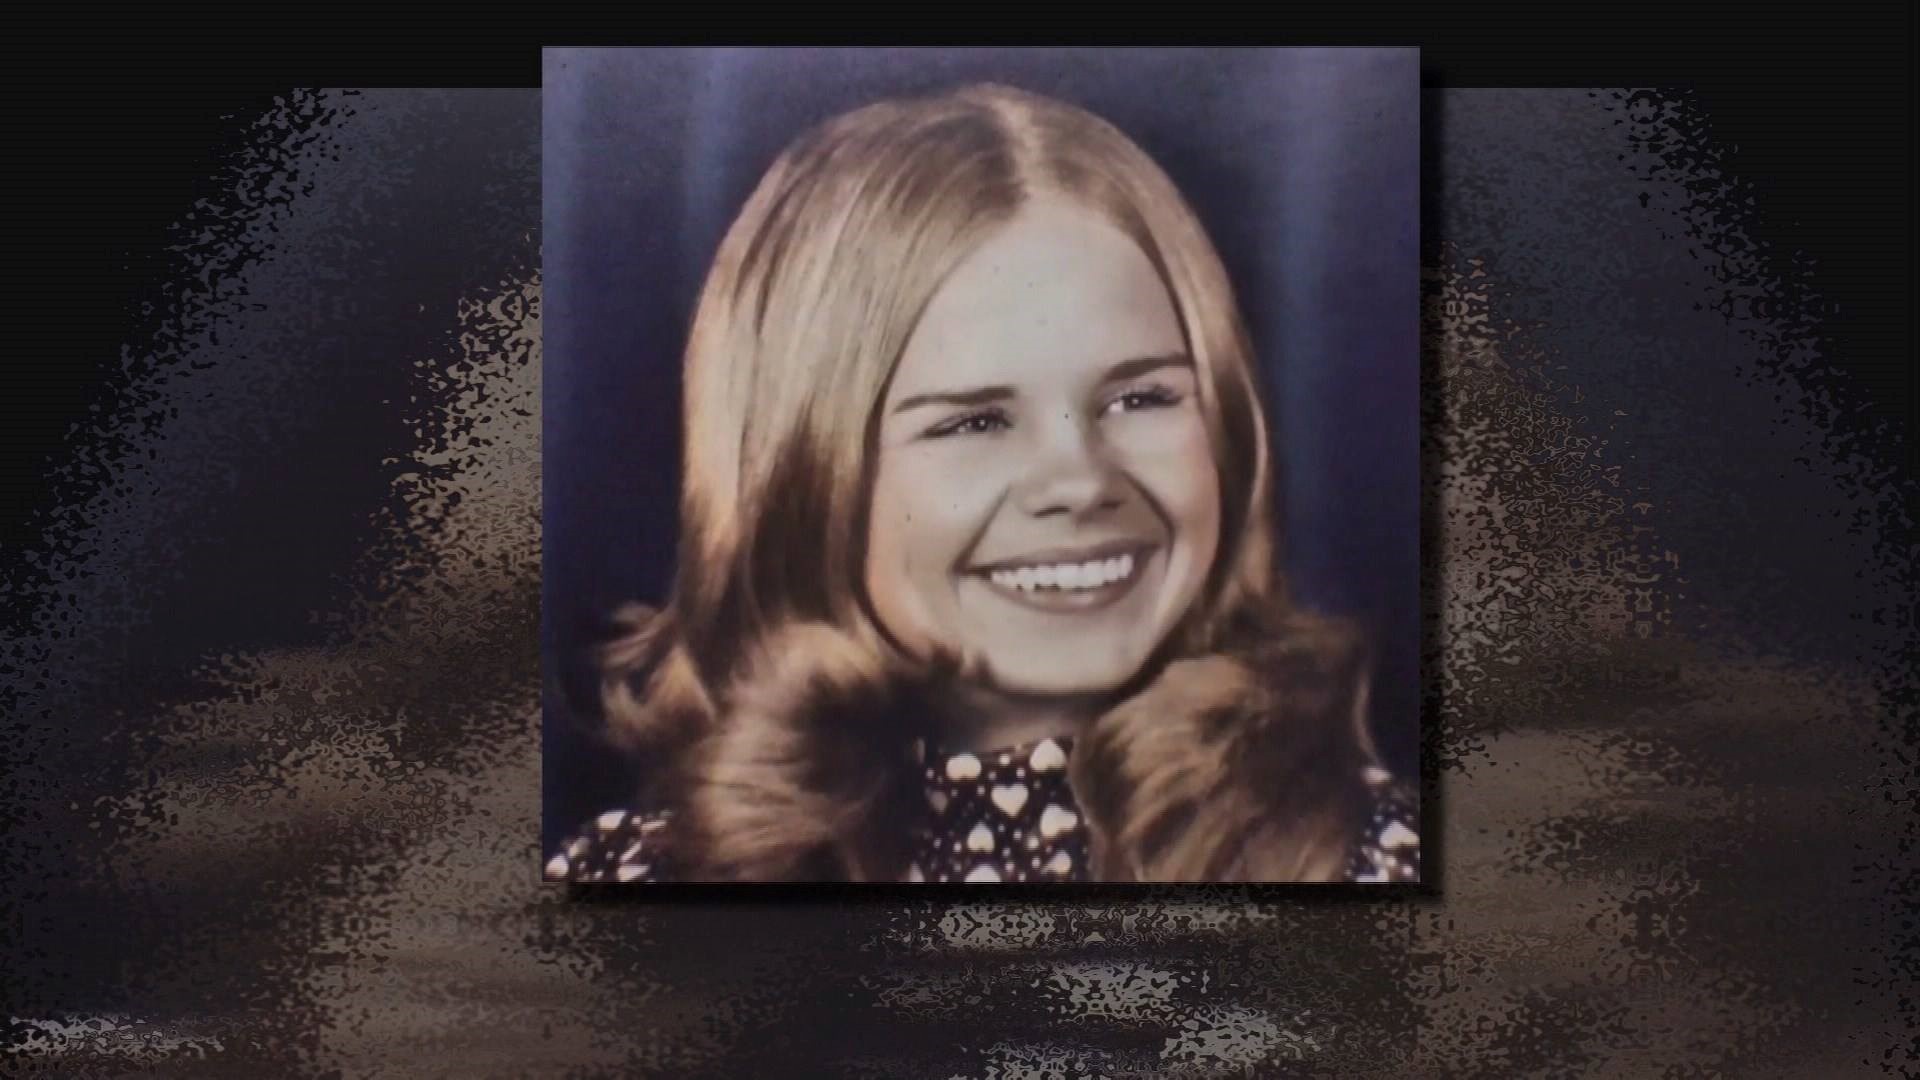 Carla Walker was kidnapped in February of 1974. Her body was found in a culvert two days later near Benbrook Lake.